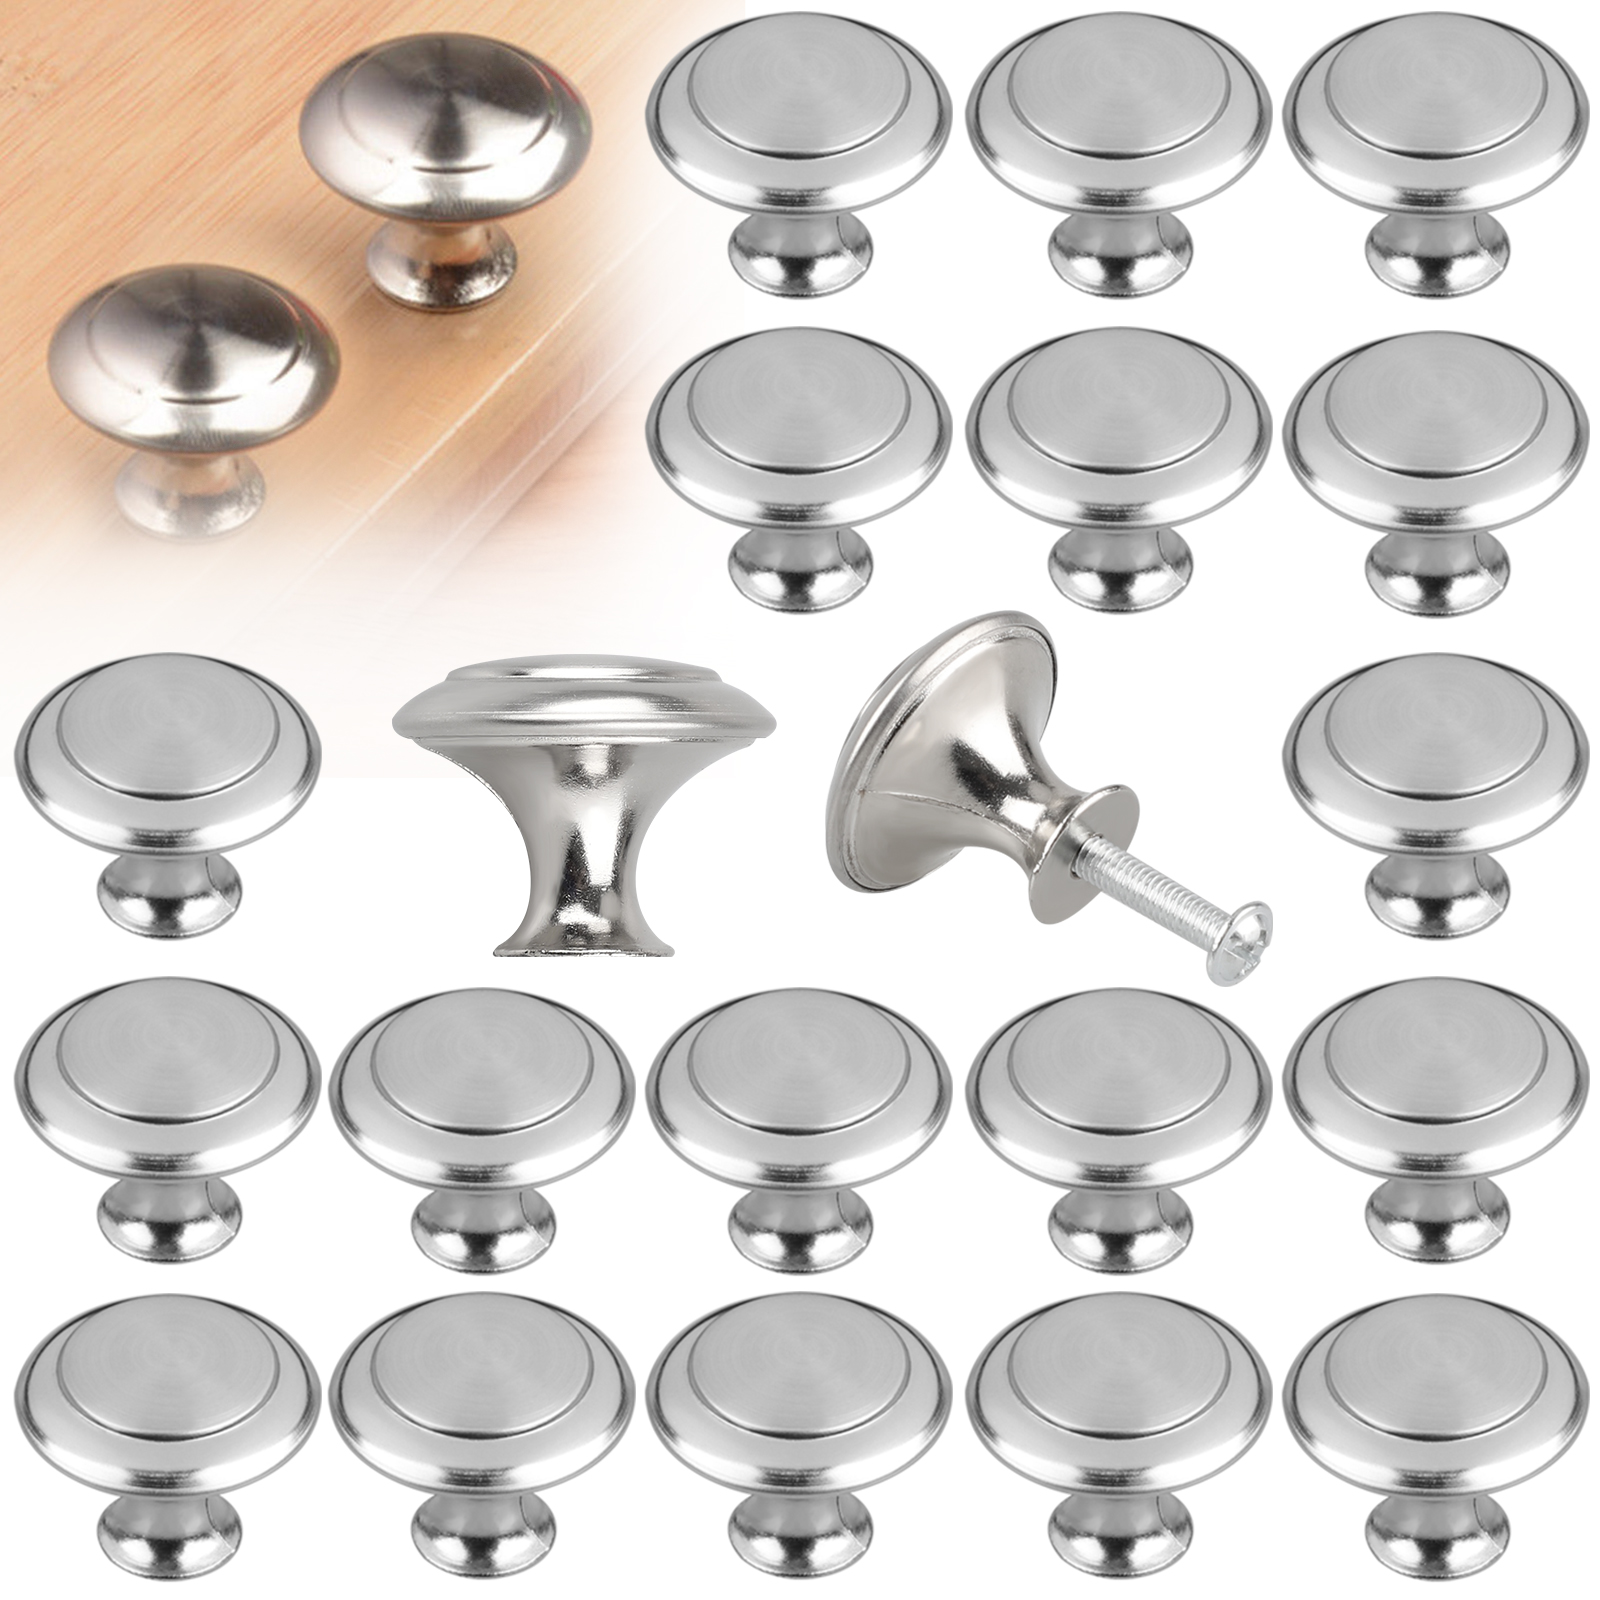 40/20pcs Kitchen Cabinet Heavy Pull Knobs, EEEkit Brushed Nickel Cabinet Knobs Cupboard Door Knobs Kitchen Hardware Round Pull Knobs for Bathroom Drawer, Silver - image 1 of 9